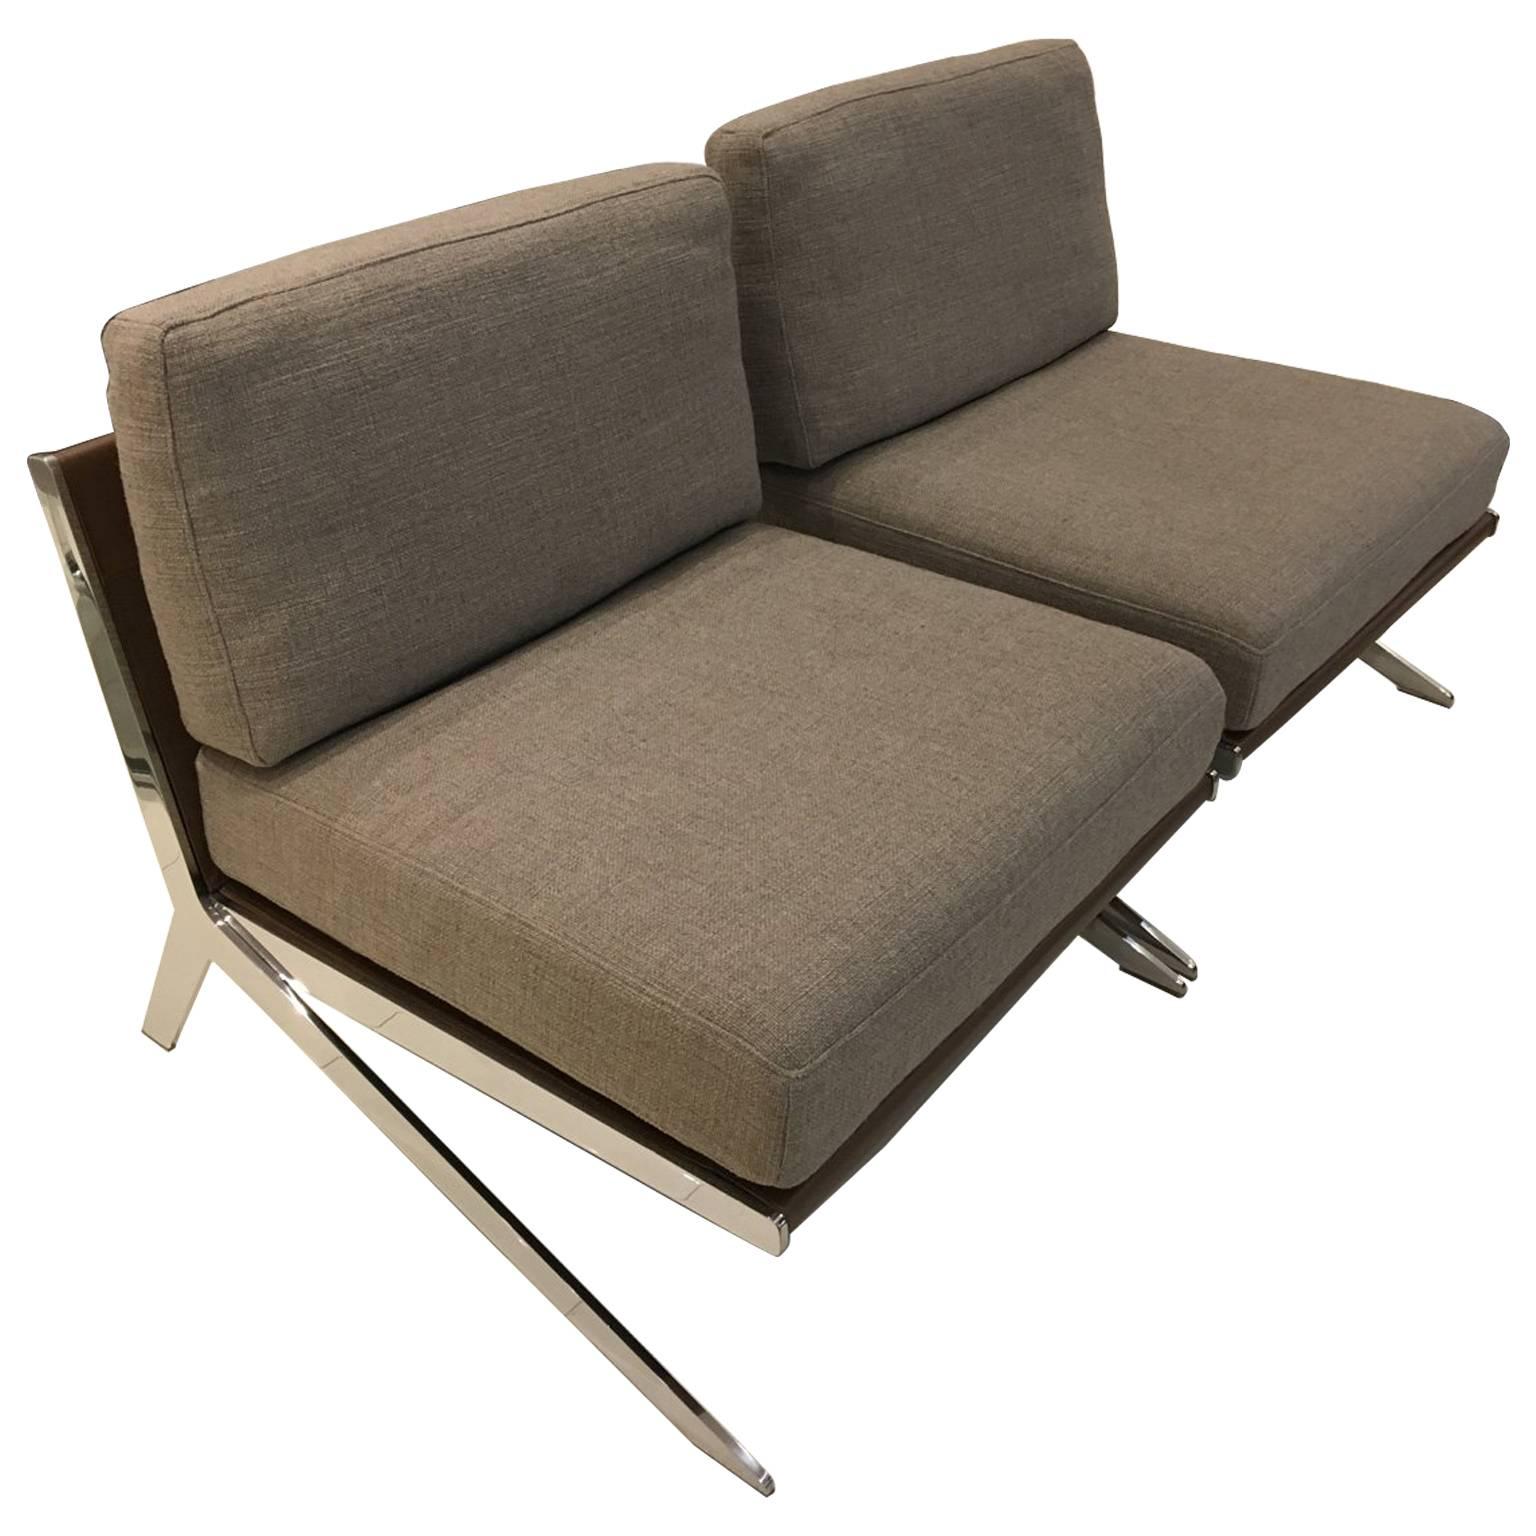 Pair of De Sede Ds-60 Armless Lounge Chairs Combination of Leather and Fabric